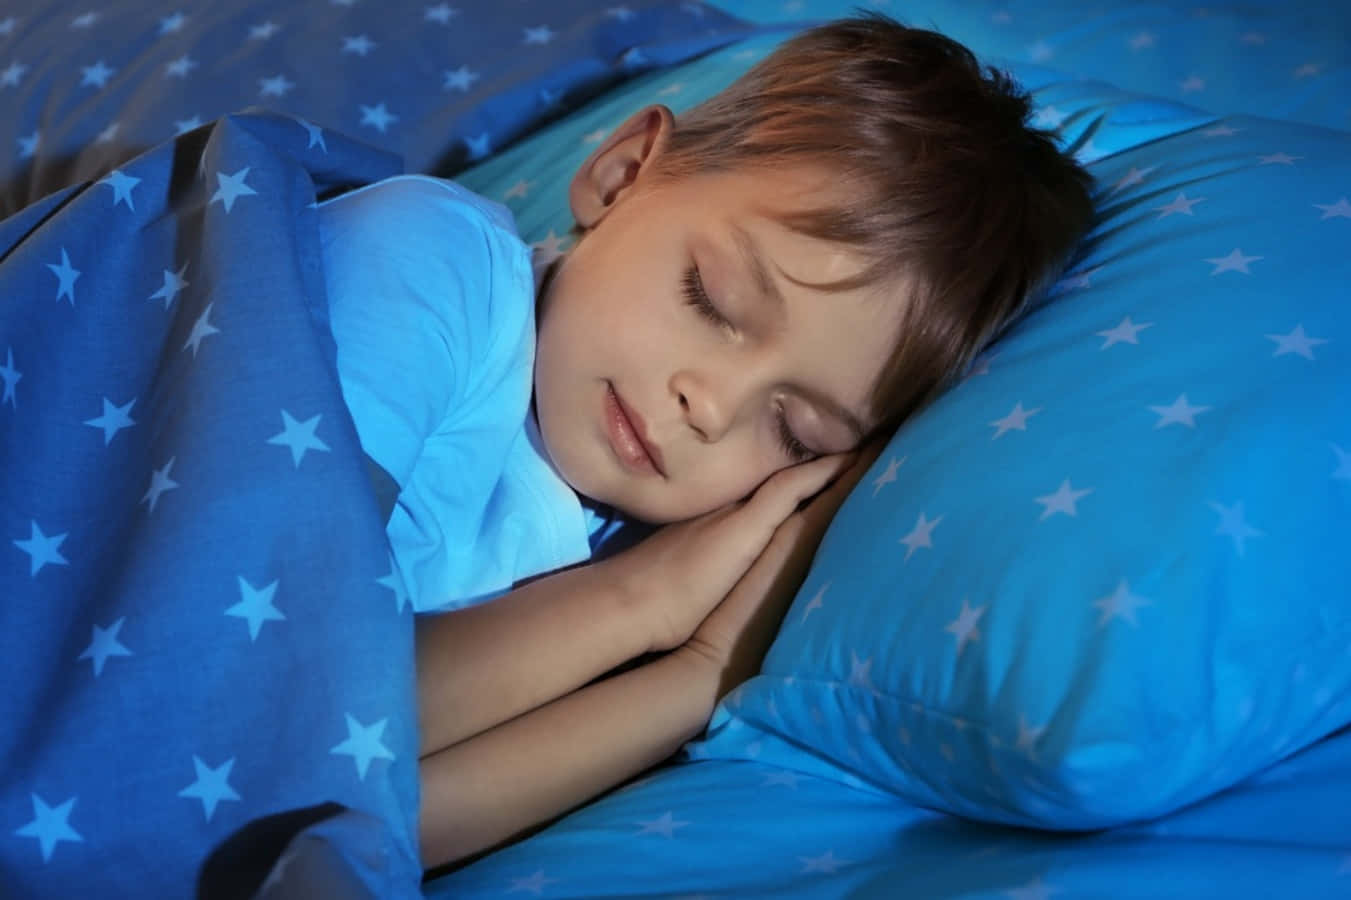 A Young Boy Sleeping In A Blue Blanket